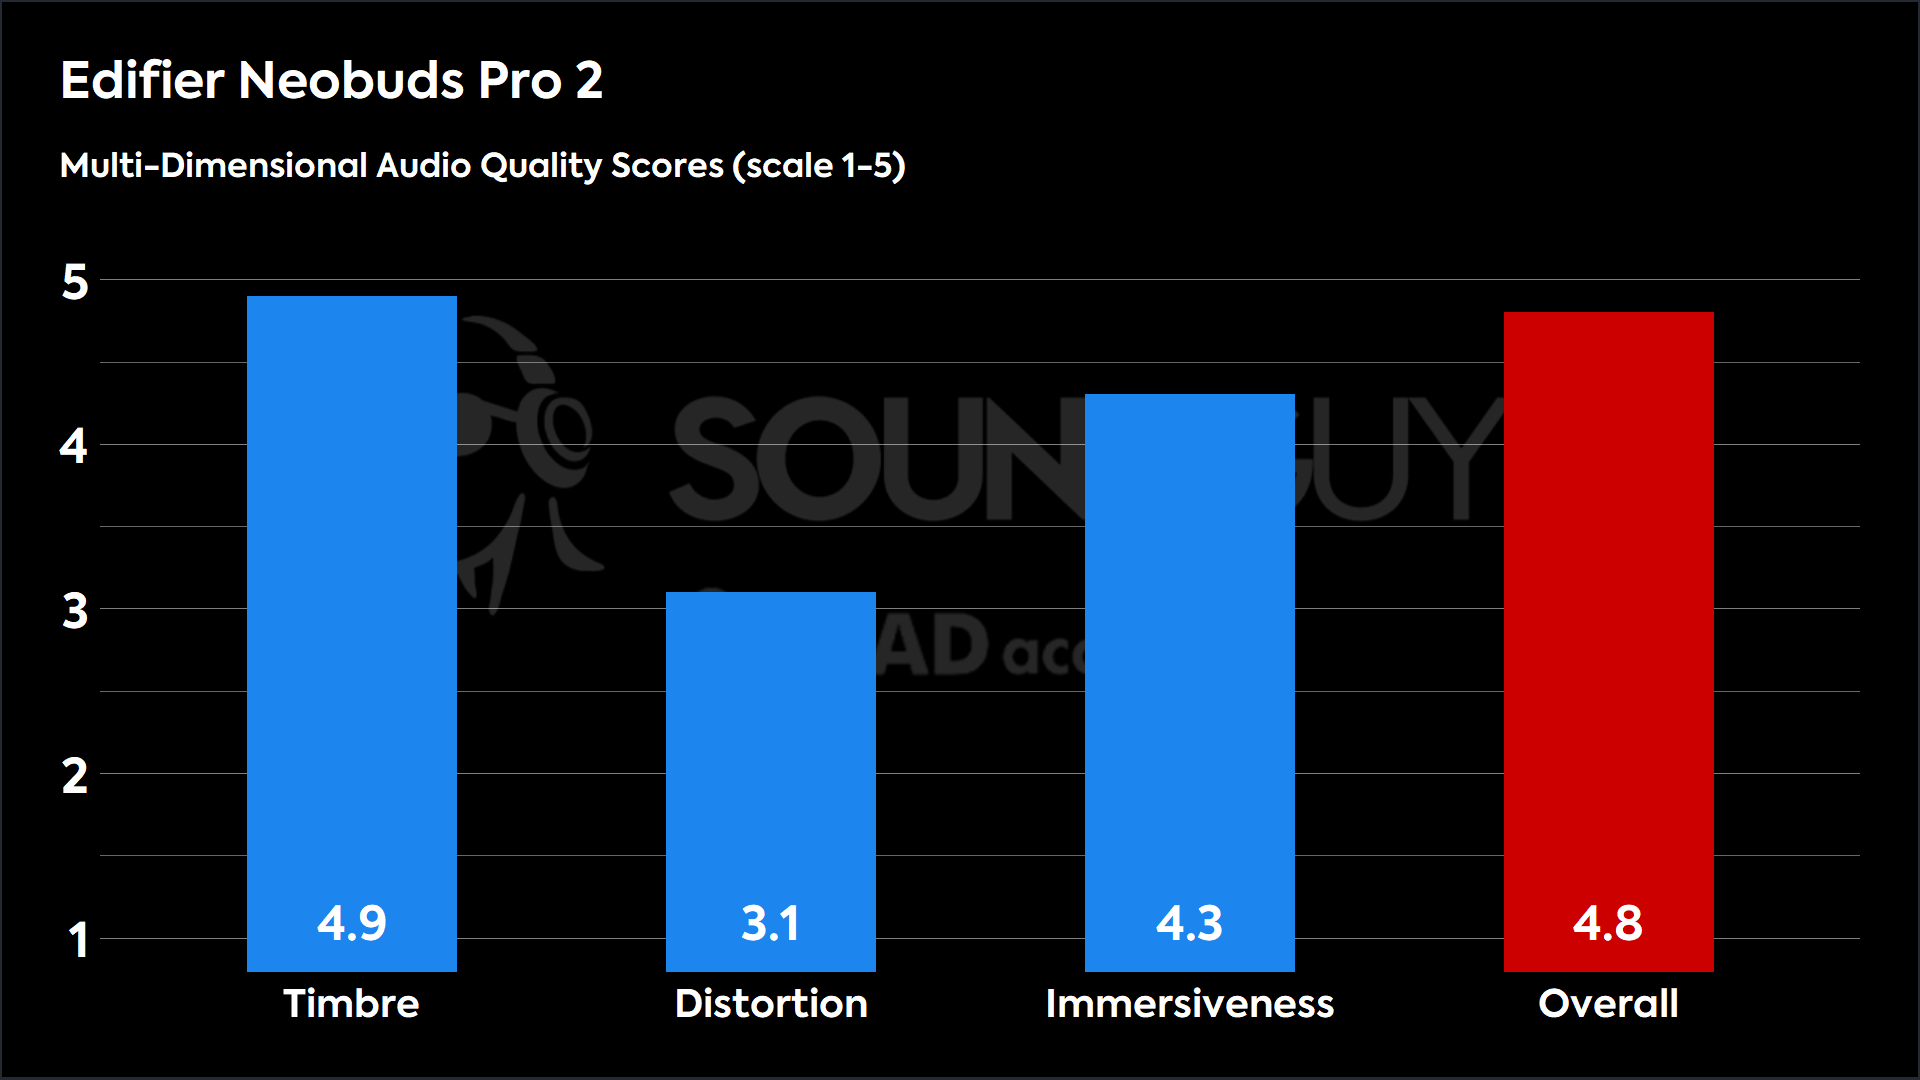 The Multi-Dimensional Audio Quality Scores (MDAQS) recorded from the Edifier NeoBuds Pro 2.